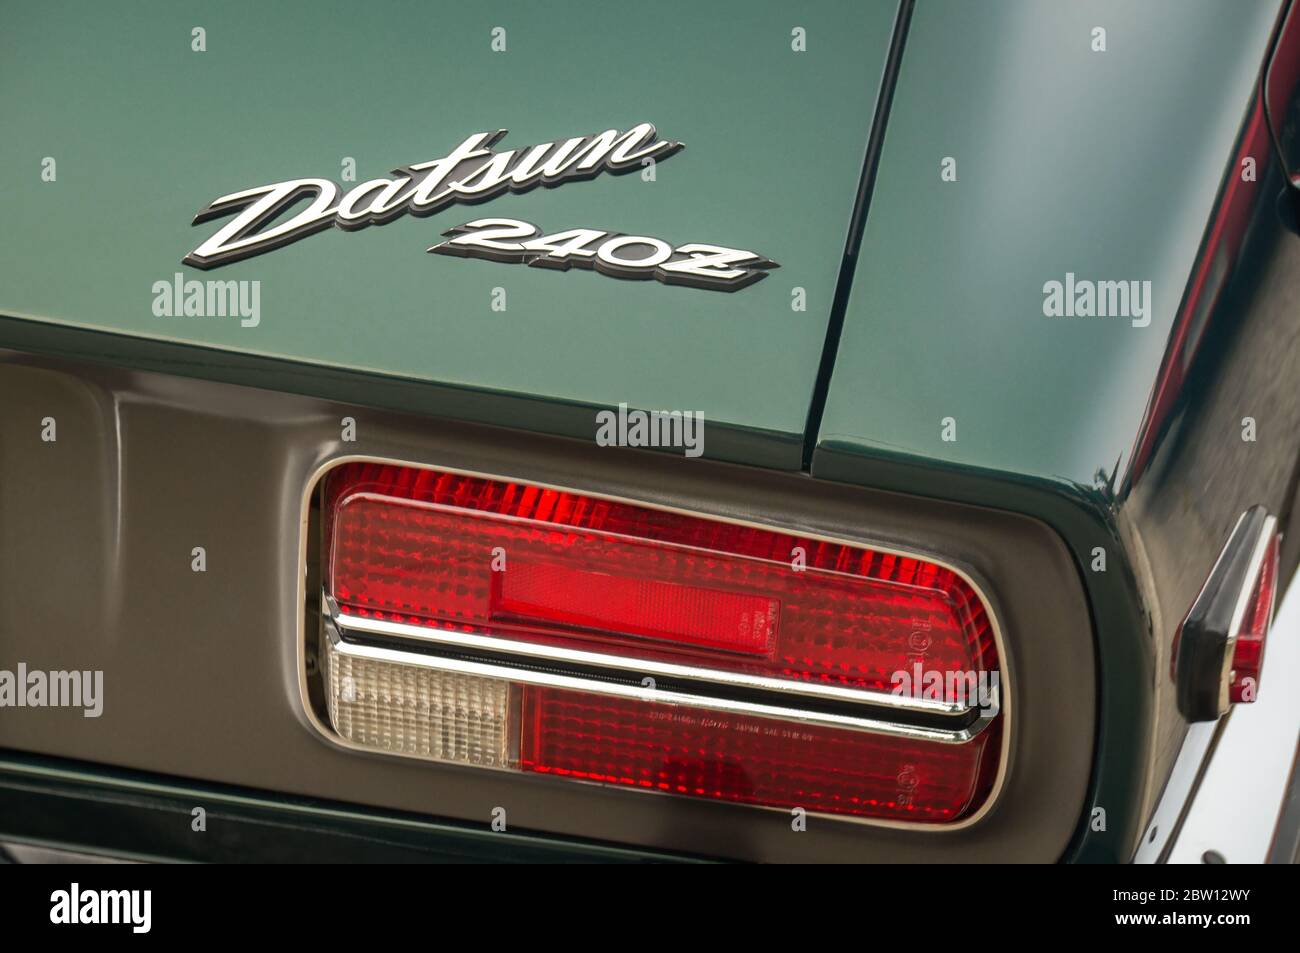 TORONTO, CANADA - 08 18 2018: Datsun logo on the trunk of 1971 Datsun 240Z coupe oldtimer sports car of Racing Green colour made by Nissan Motor Co Stock Photo